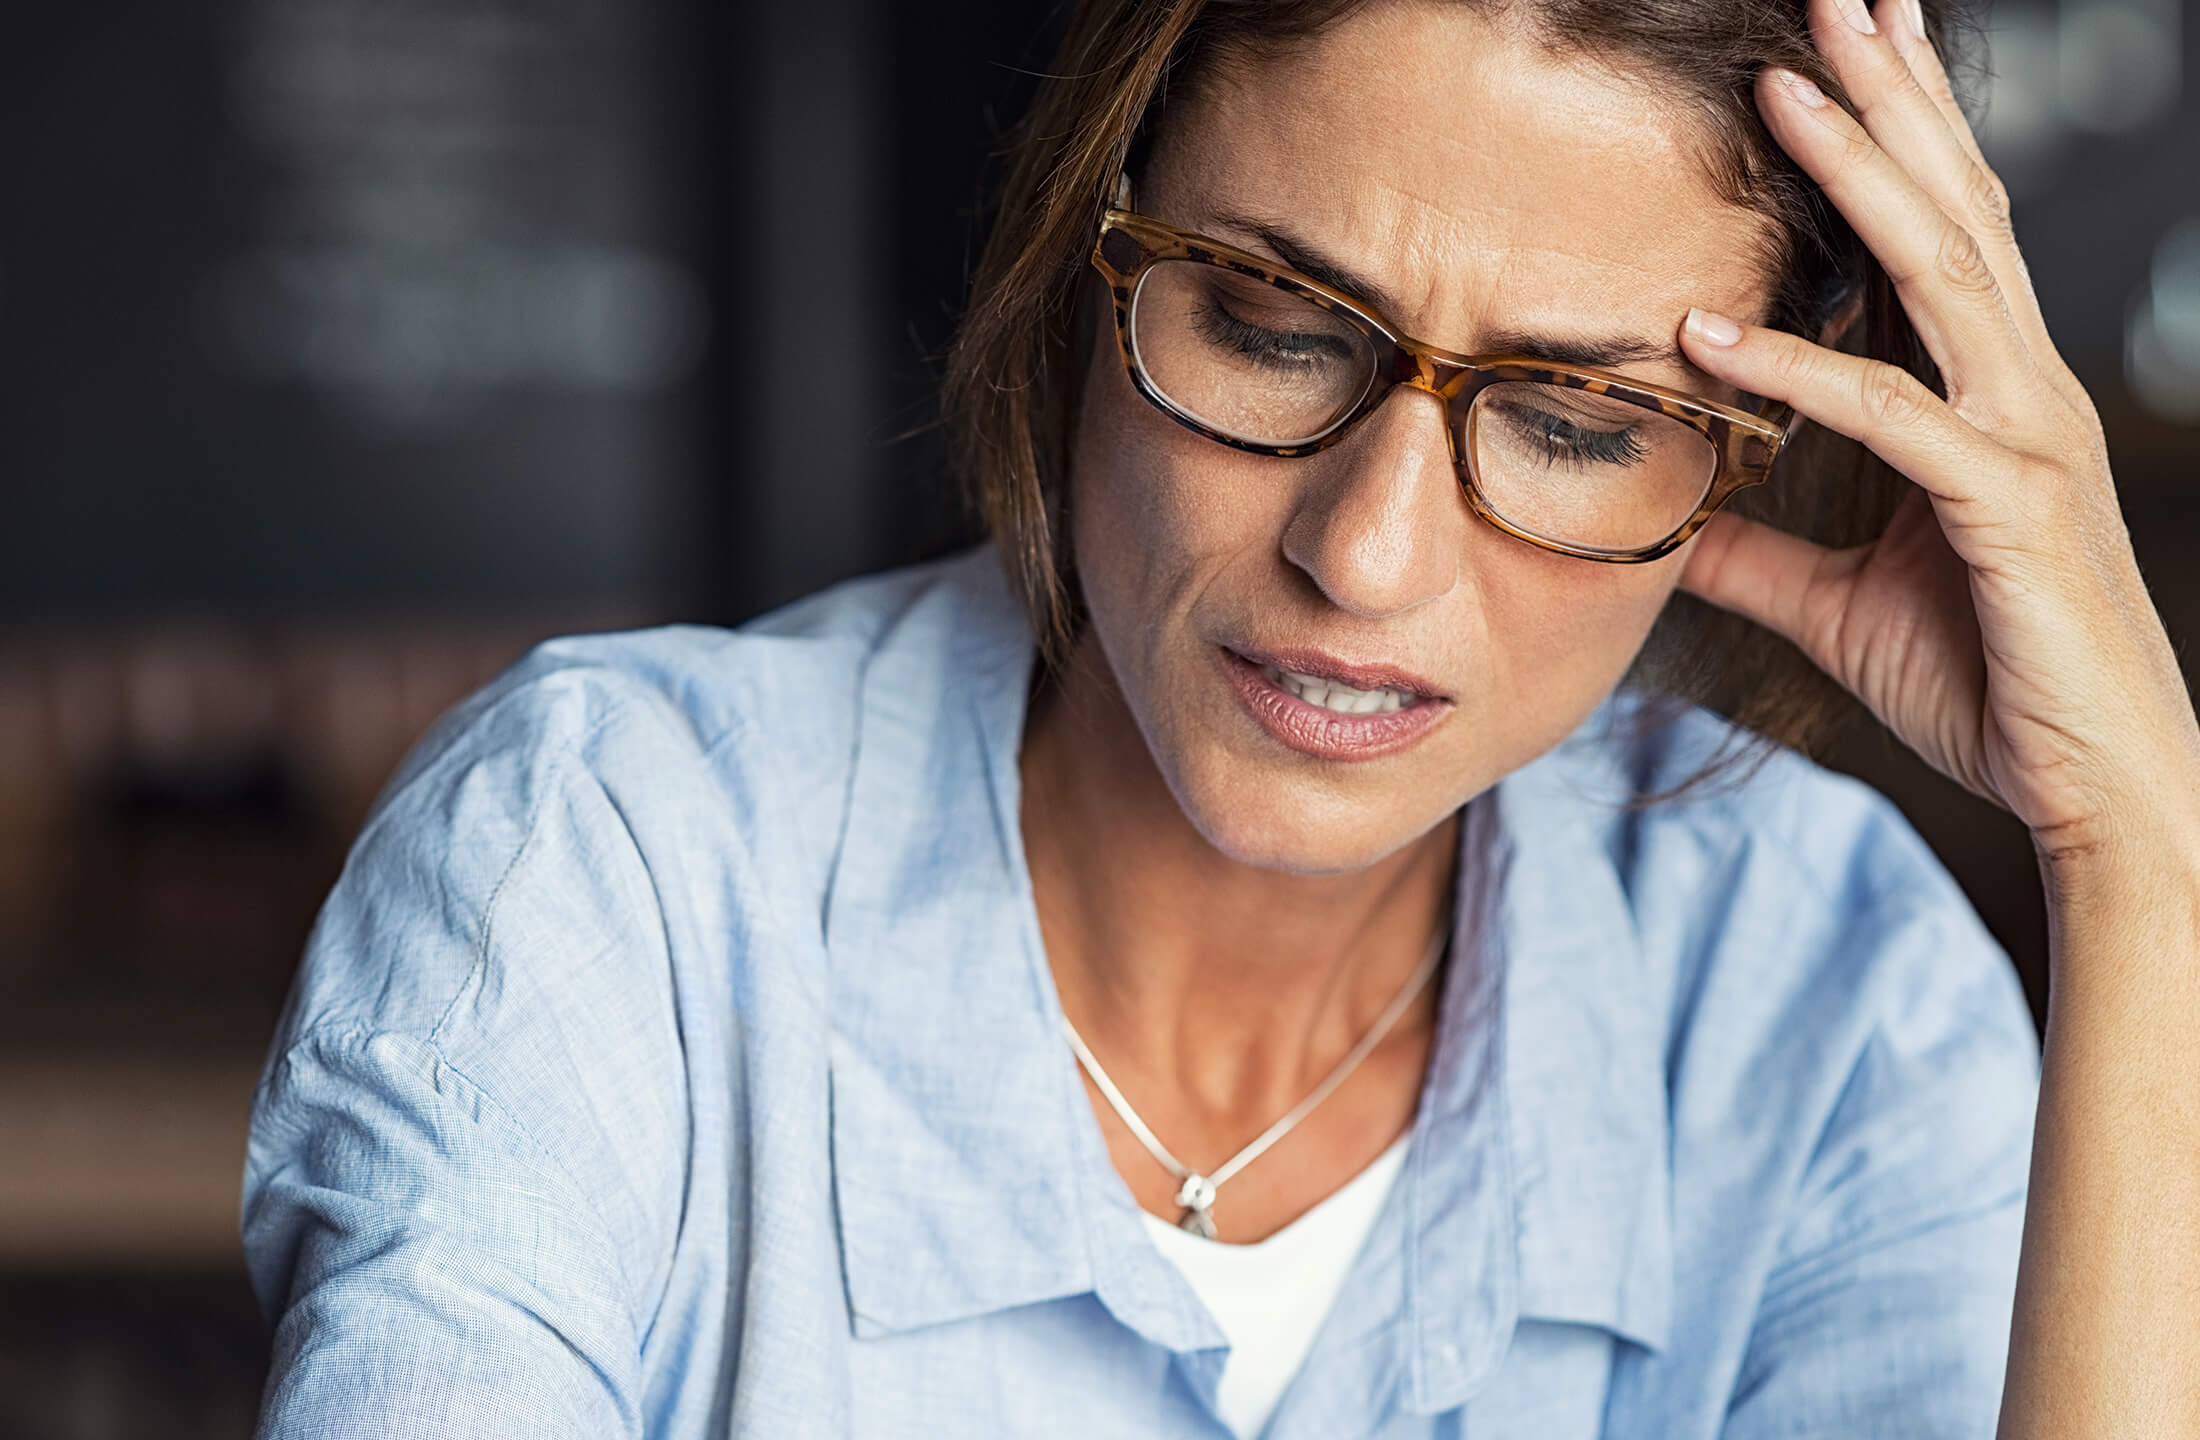 Introducing three most common symptoms of menopause